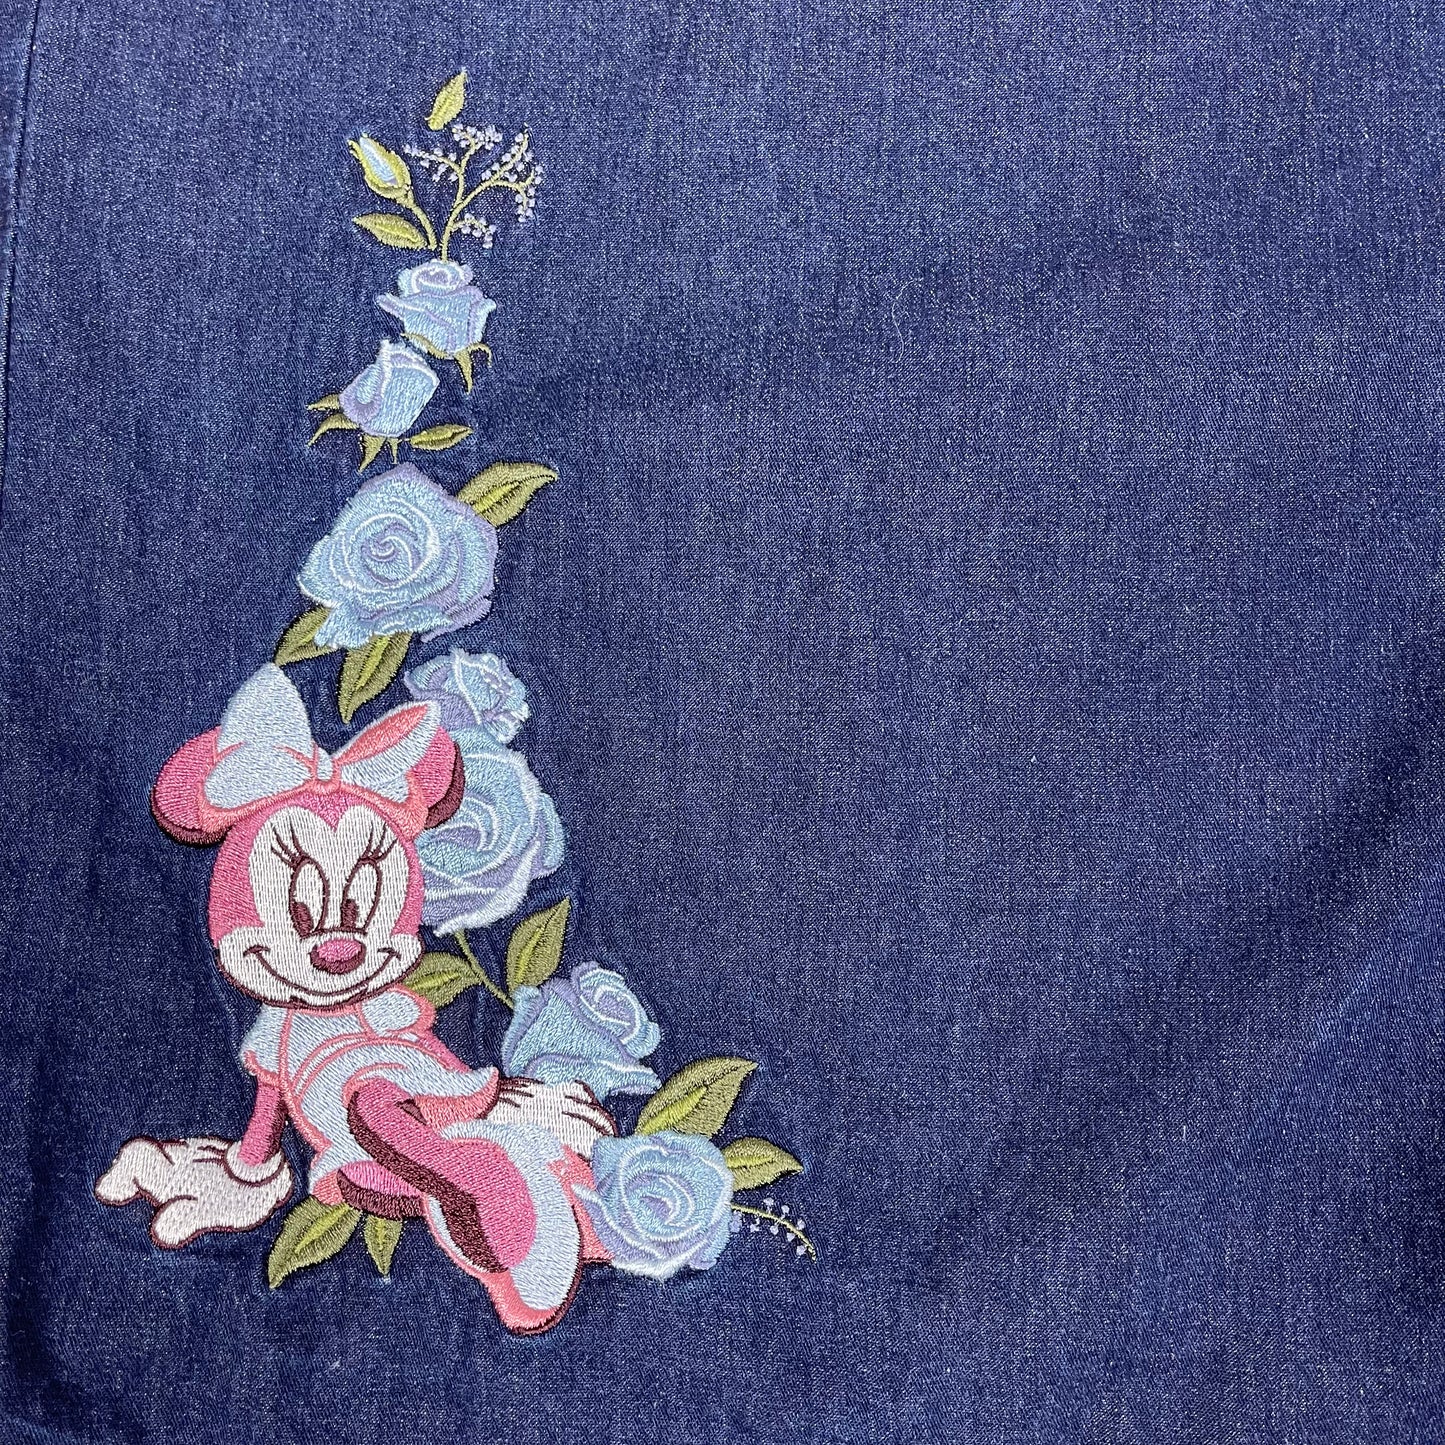 VINTAGE MINNIE MOUSE EMBROIDERED SKIRT